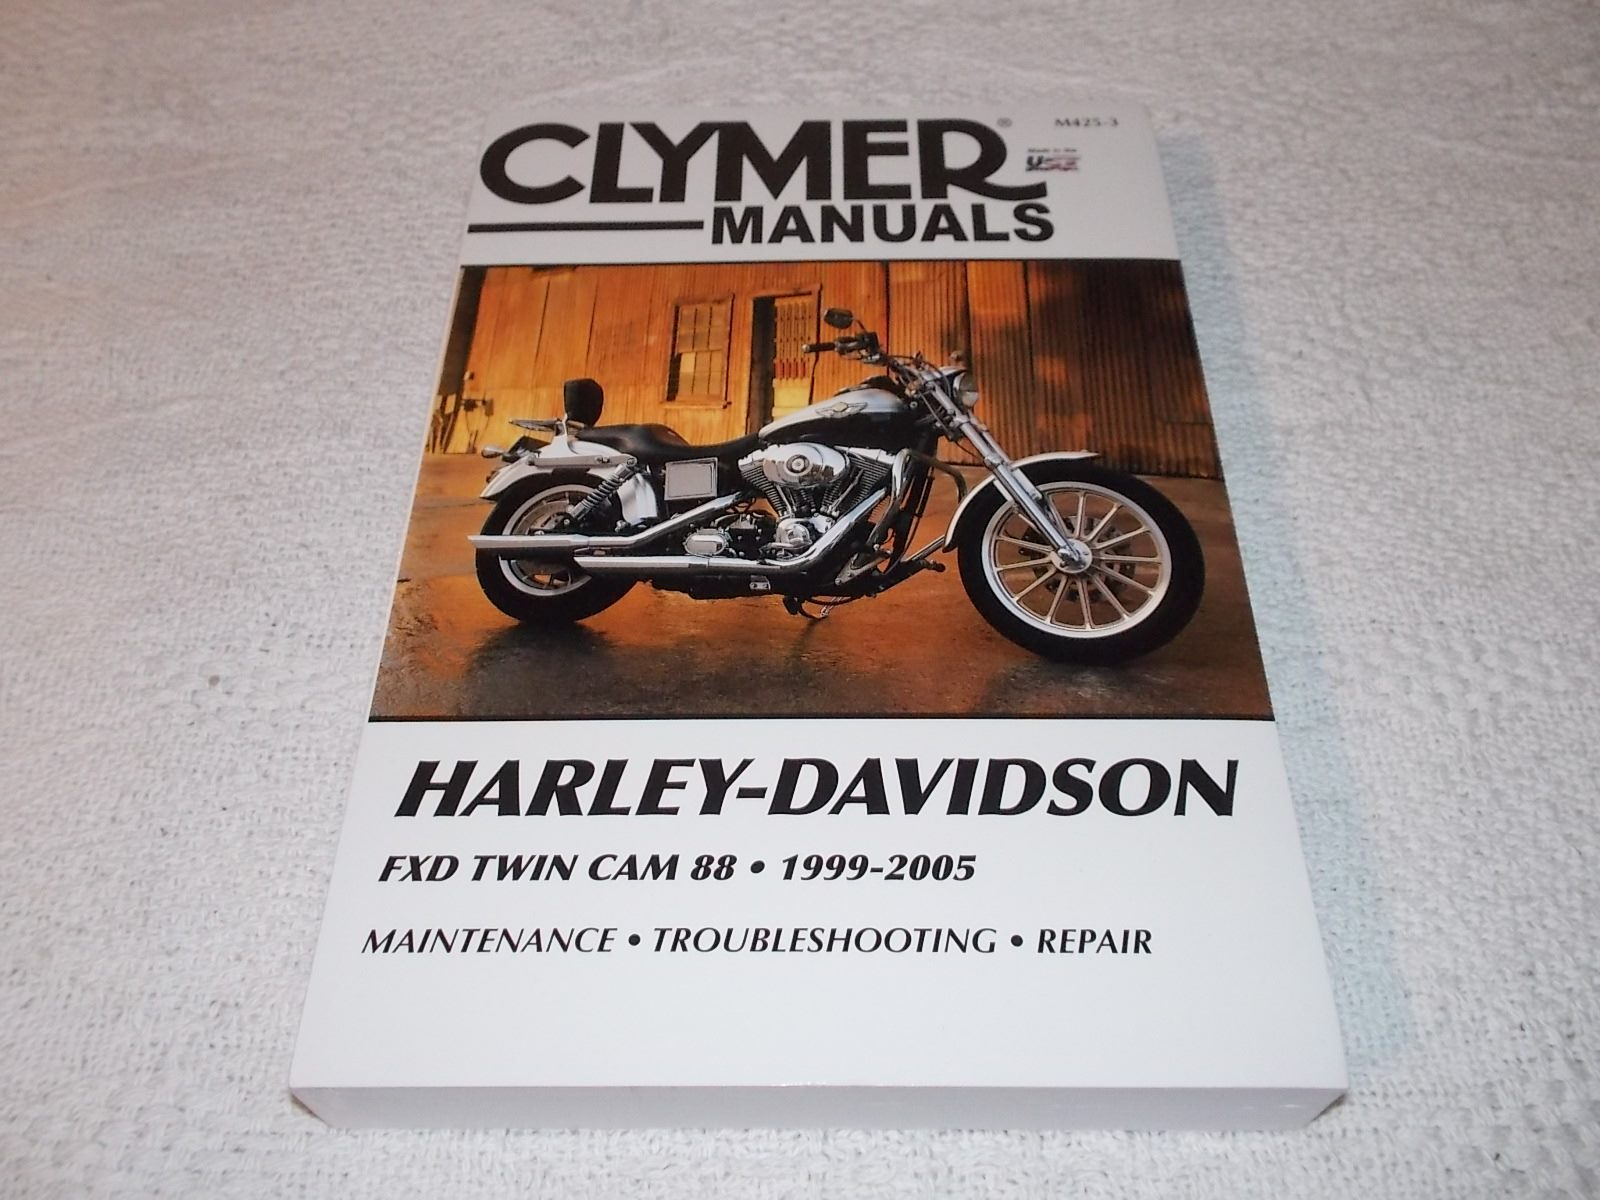 Parts Accessories Clymer Service Repair Manual Harley Davidson 99 05 Fxd Fxdwg Dyna Superglide Manuals Literature